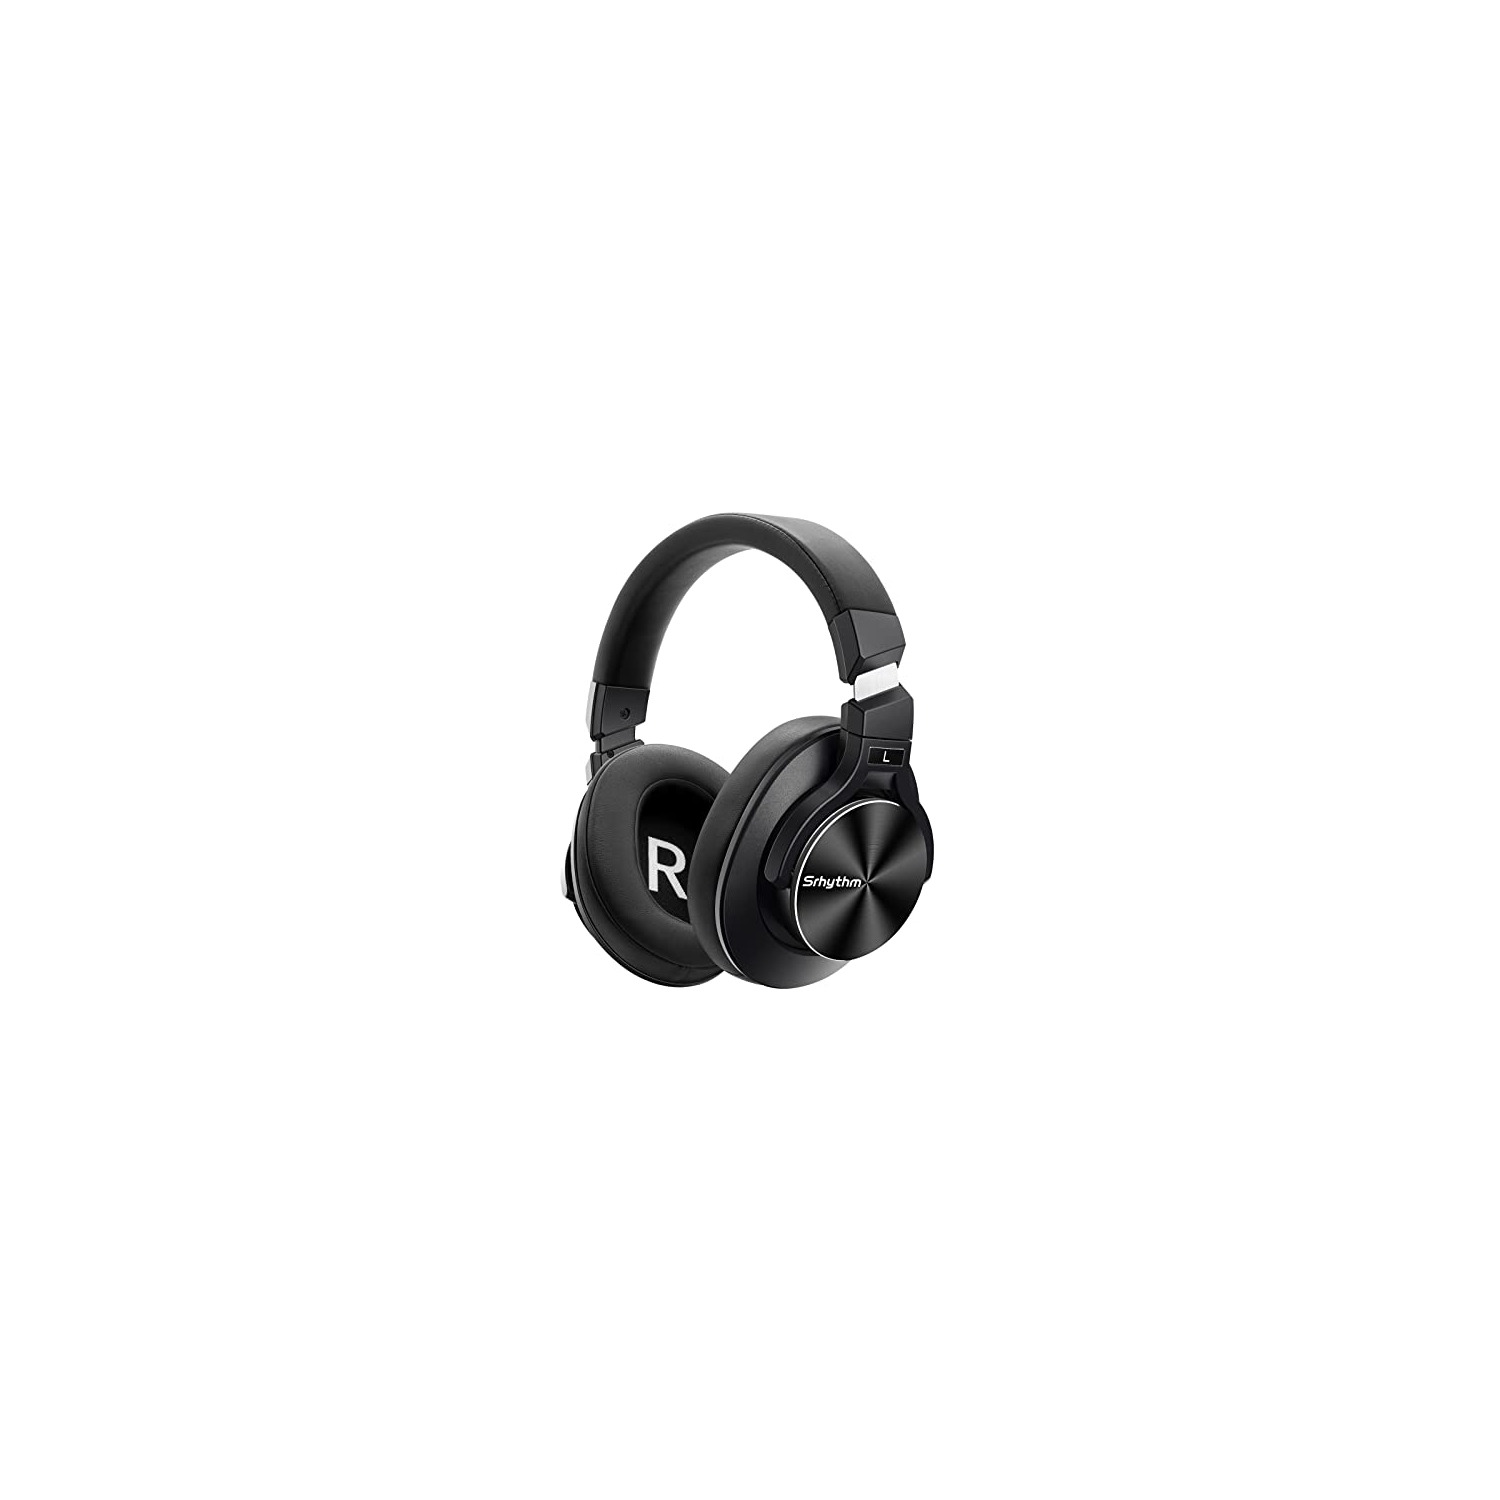 NC75 Pro Noise Cancelling Headphones Bluetooth V5.0 Wireless,40 Hours Playtime Headsets Over Ear with Microphones&Fast Charge for TV/PC/Cell Phone (Metal Black)